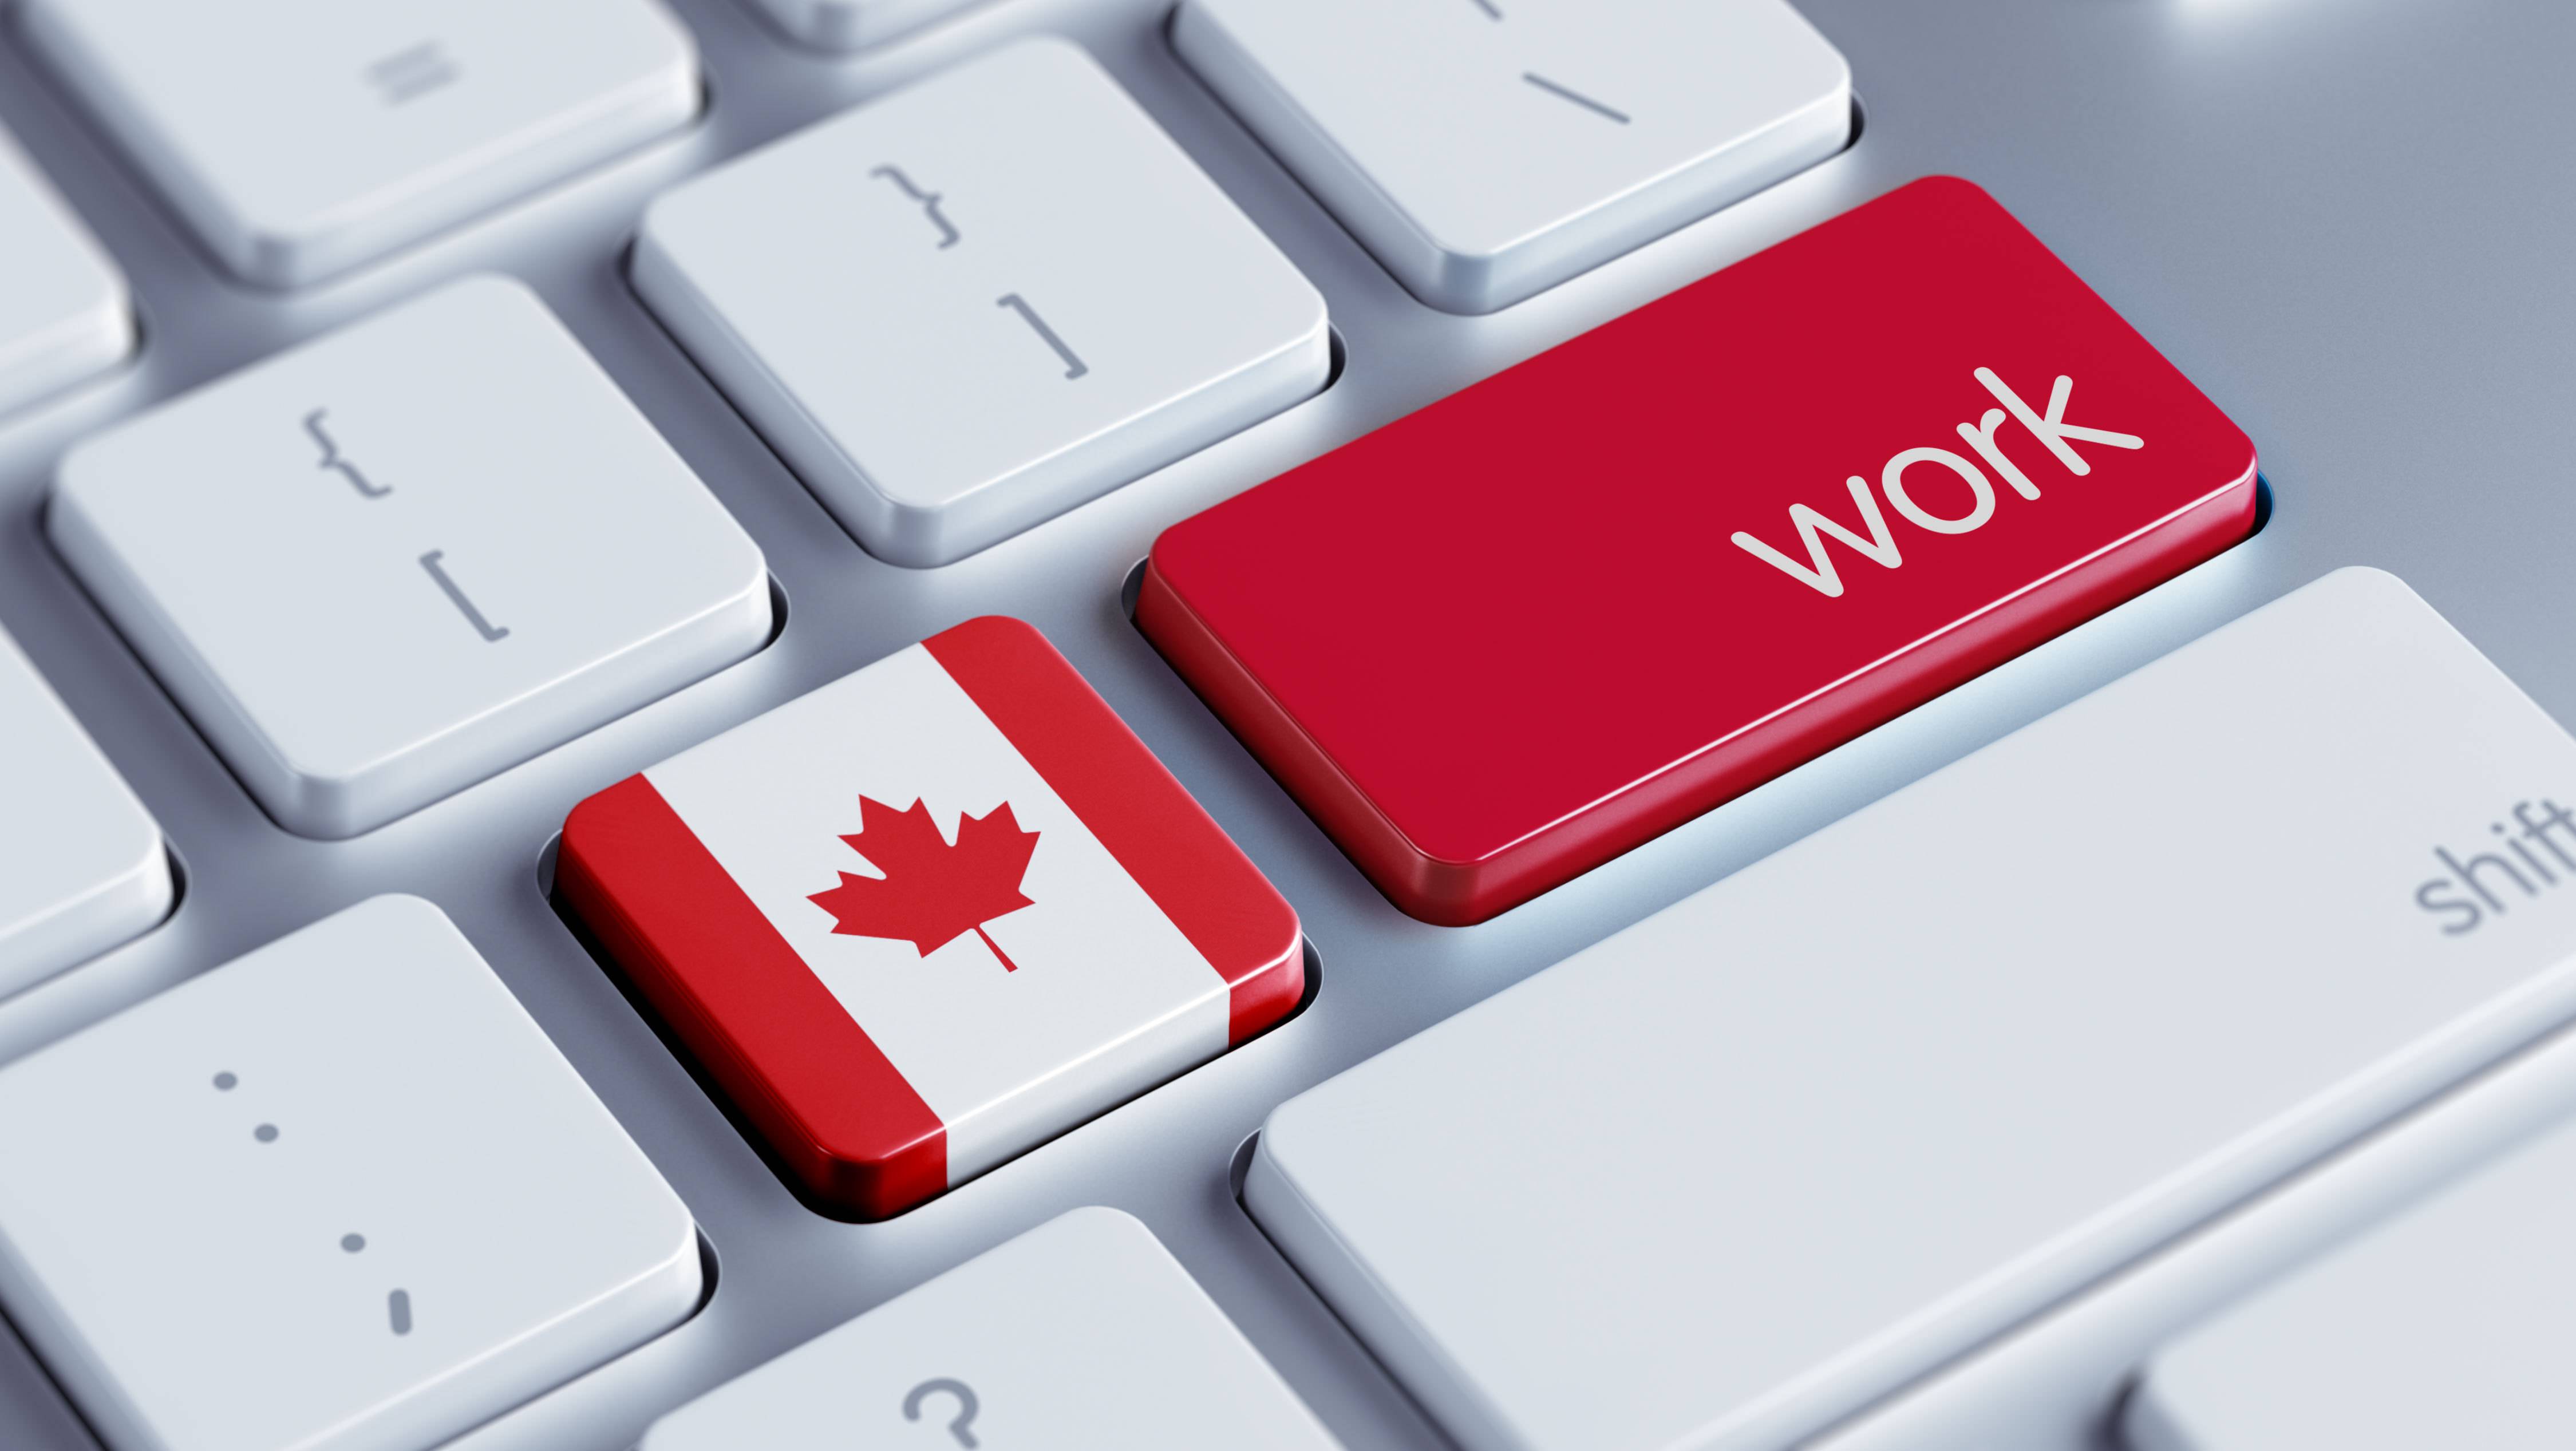 Free Secrets On How To Find An Employer, Immigrate And Work As A Caregiver In Canada